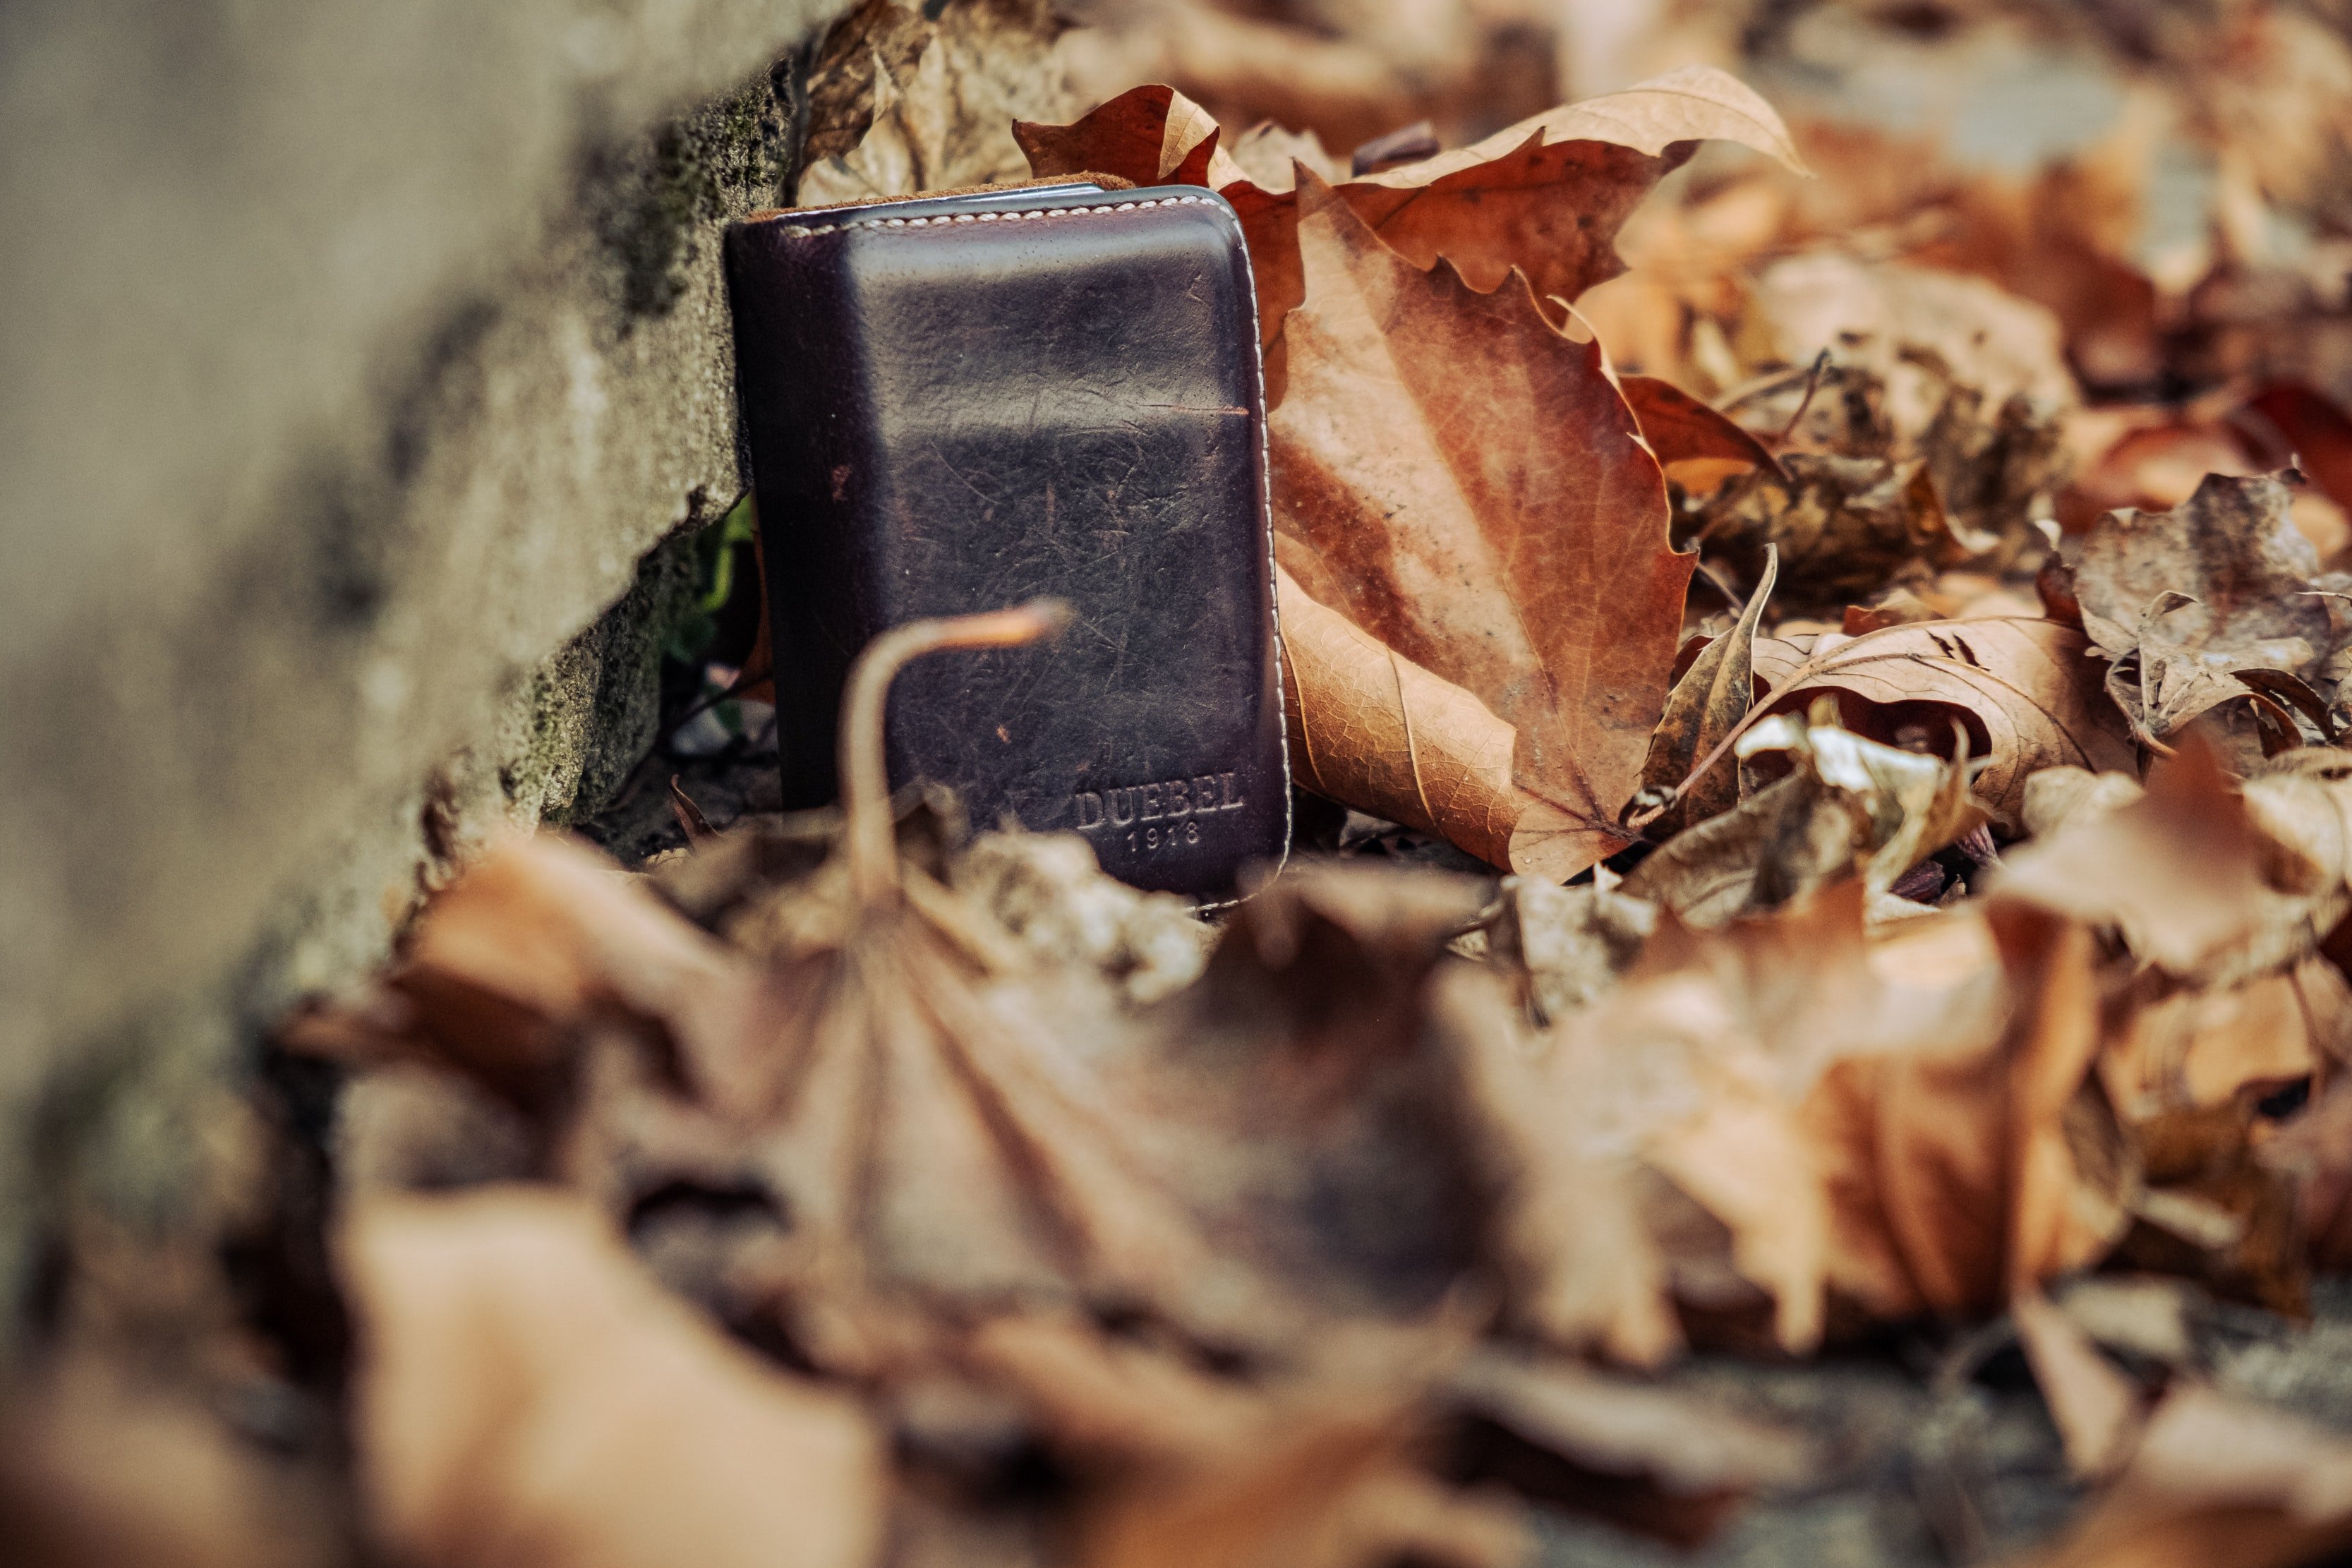 Jimmy found a wallet by the side of the road. | Source: Unsplash